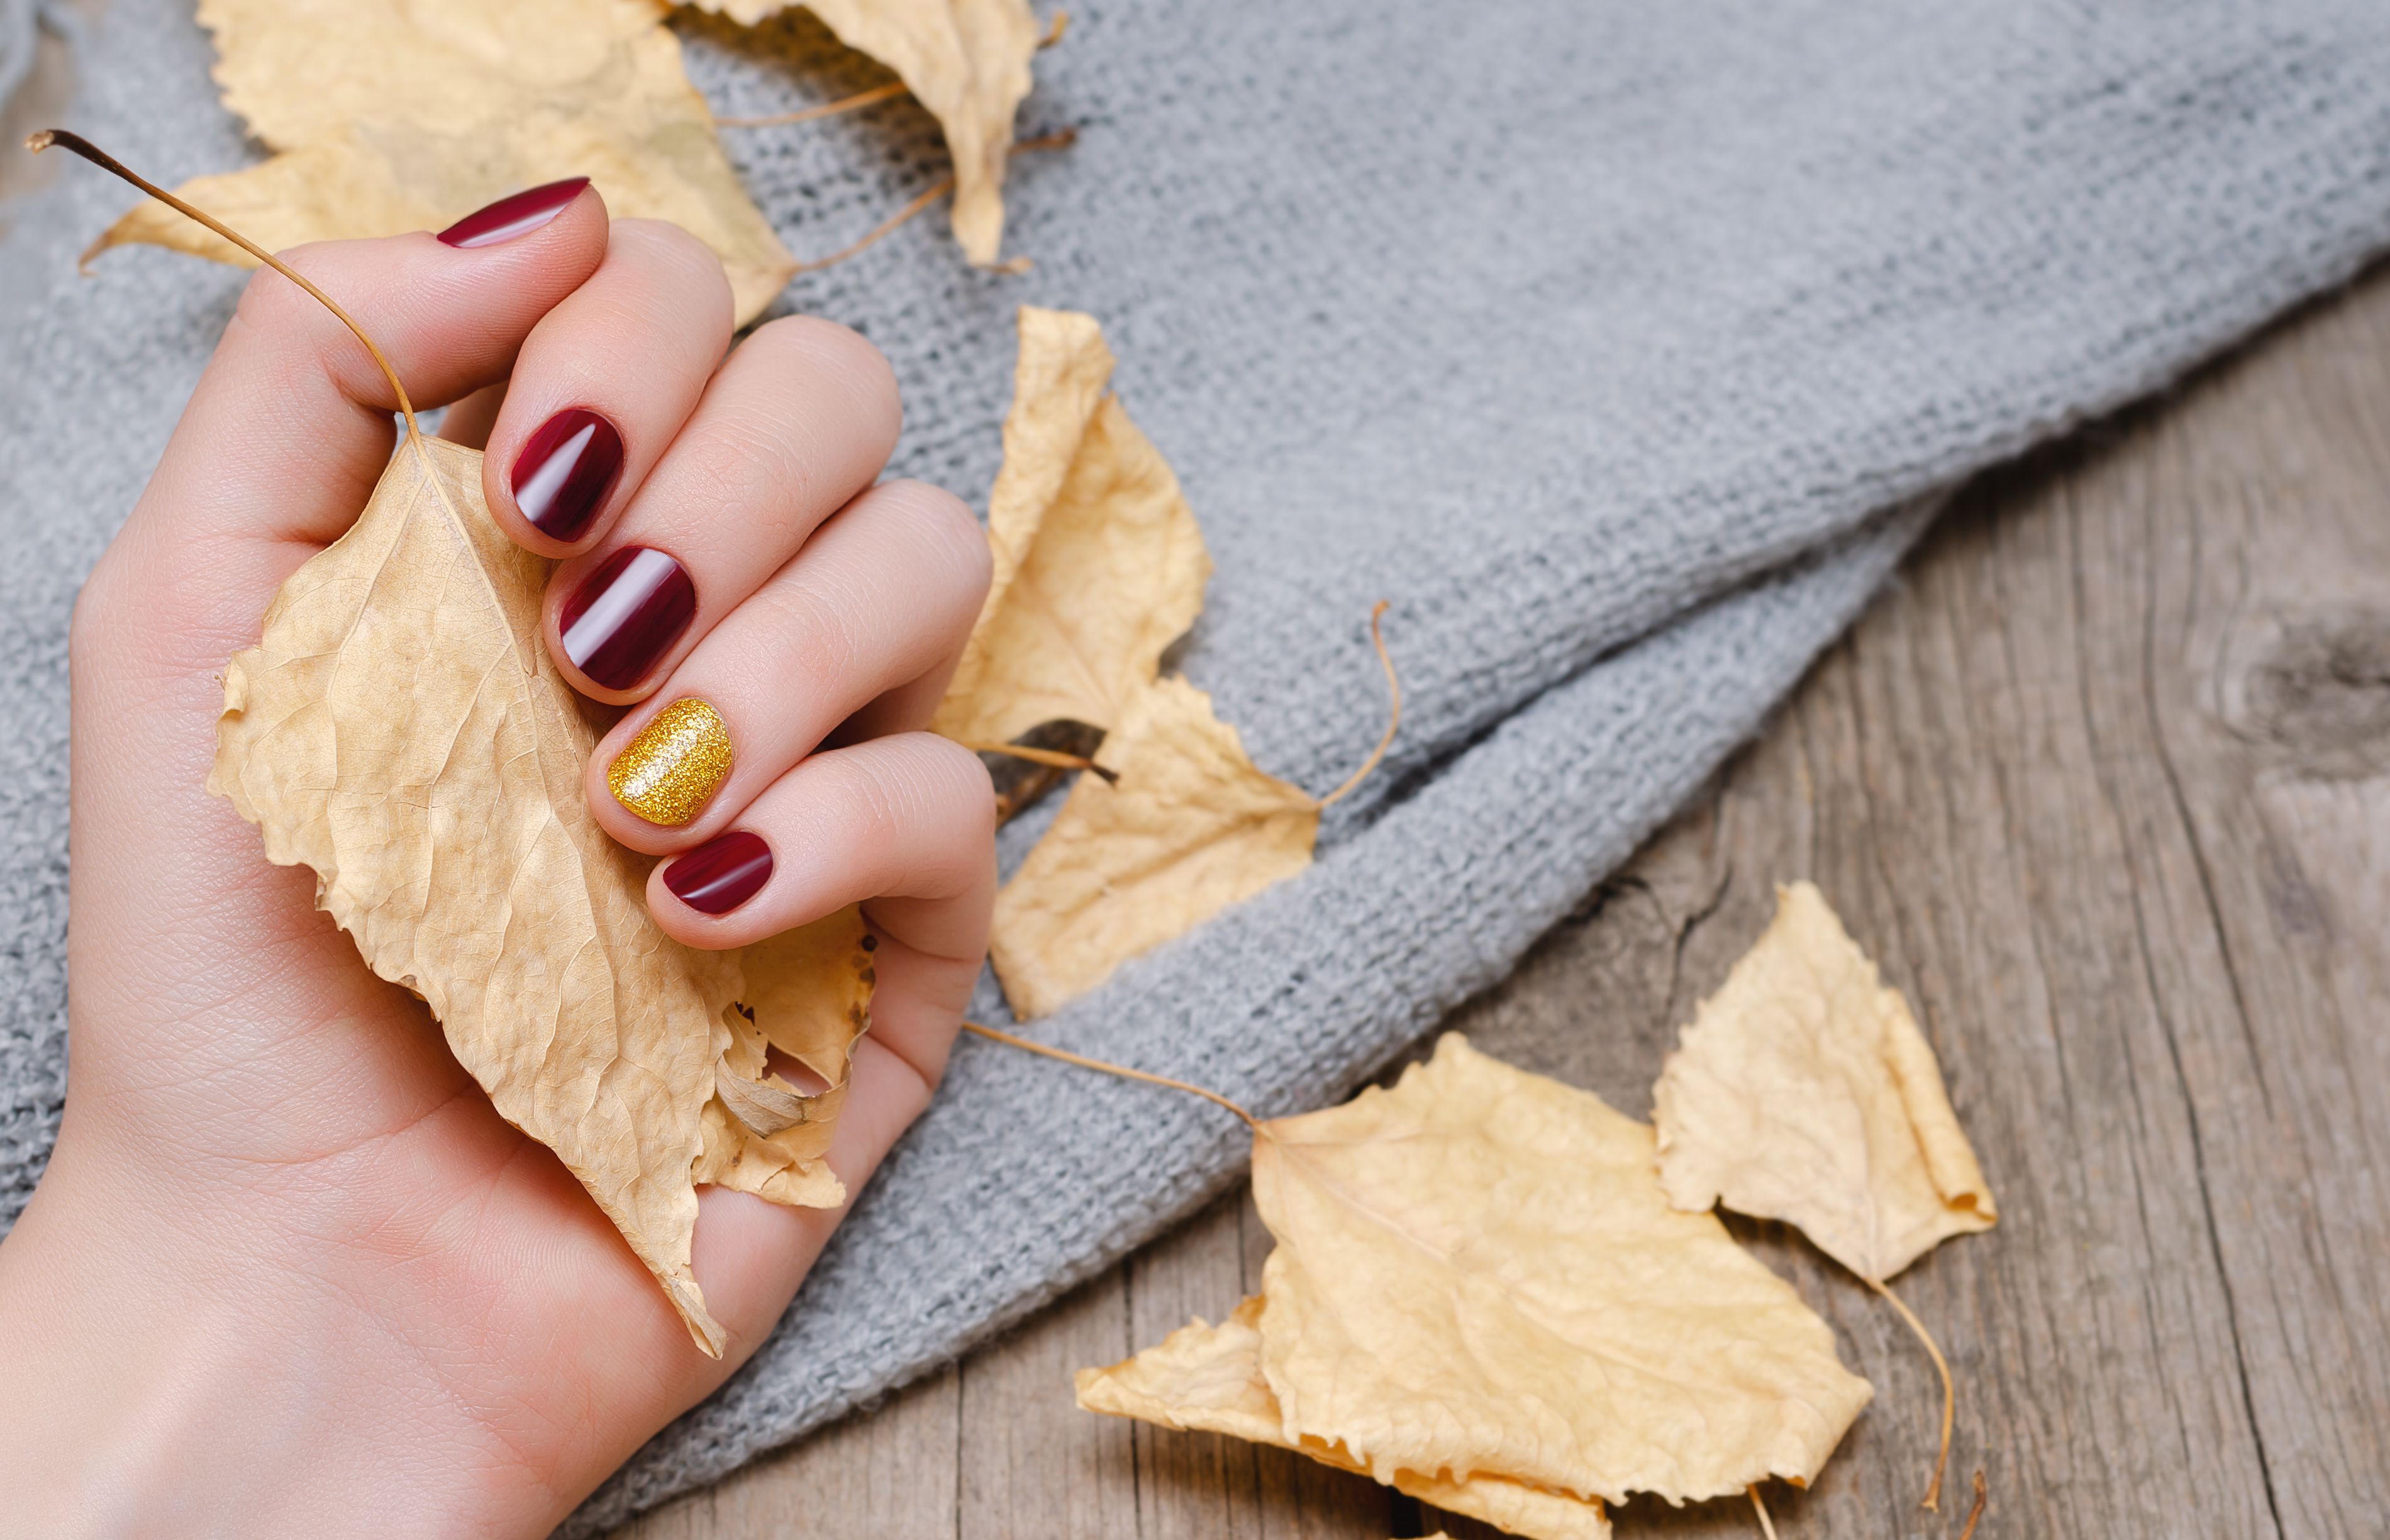 3. "Fall Foliage" Nail Colors for October - wide 7